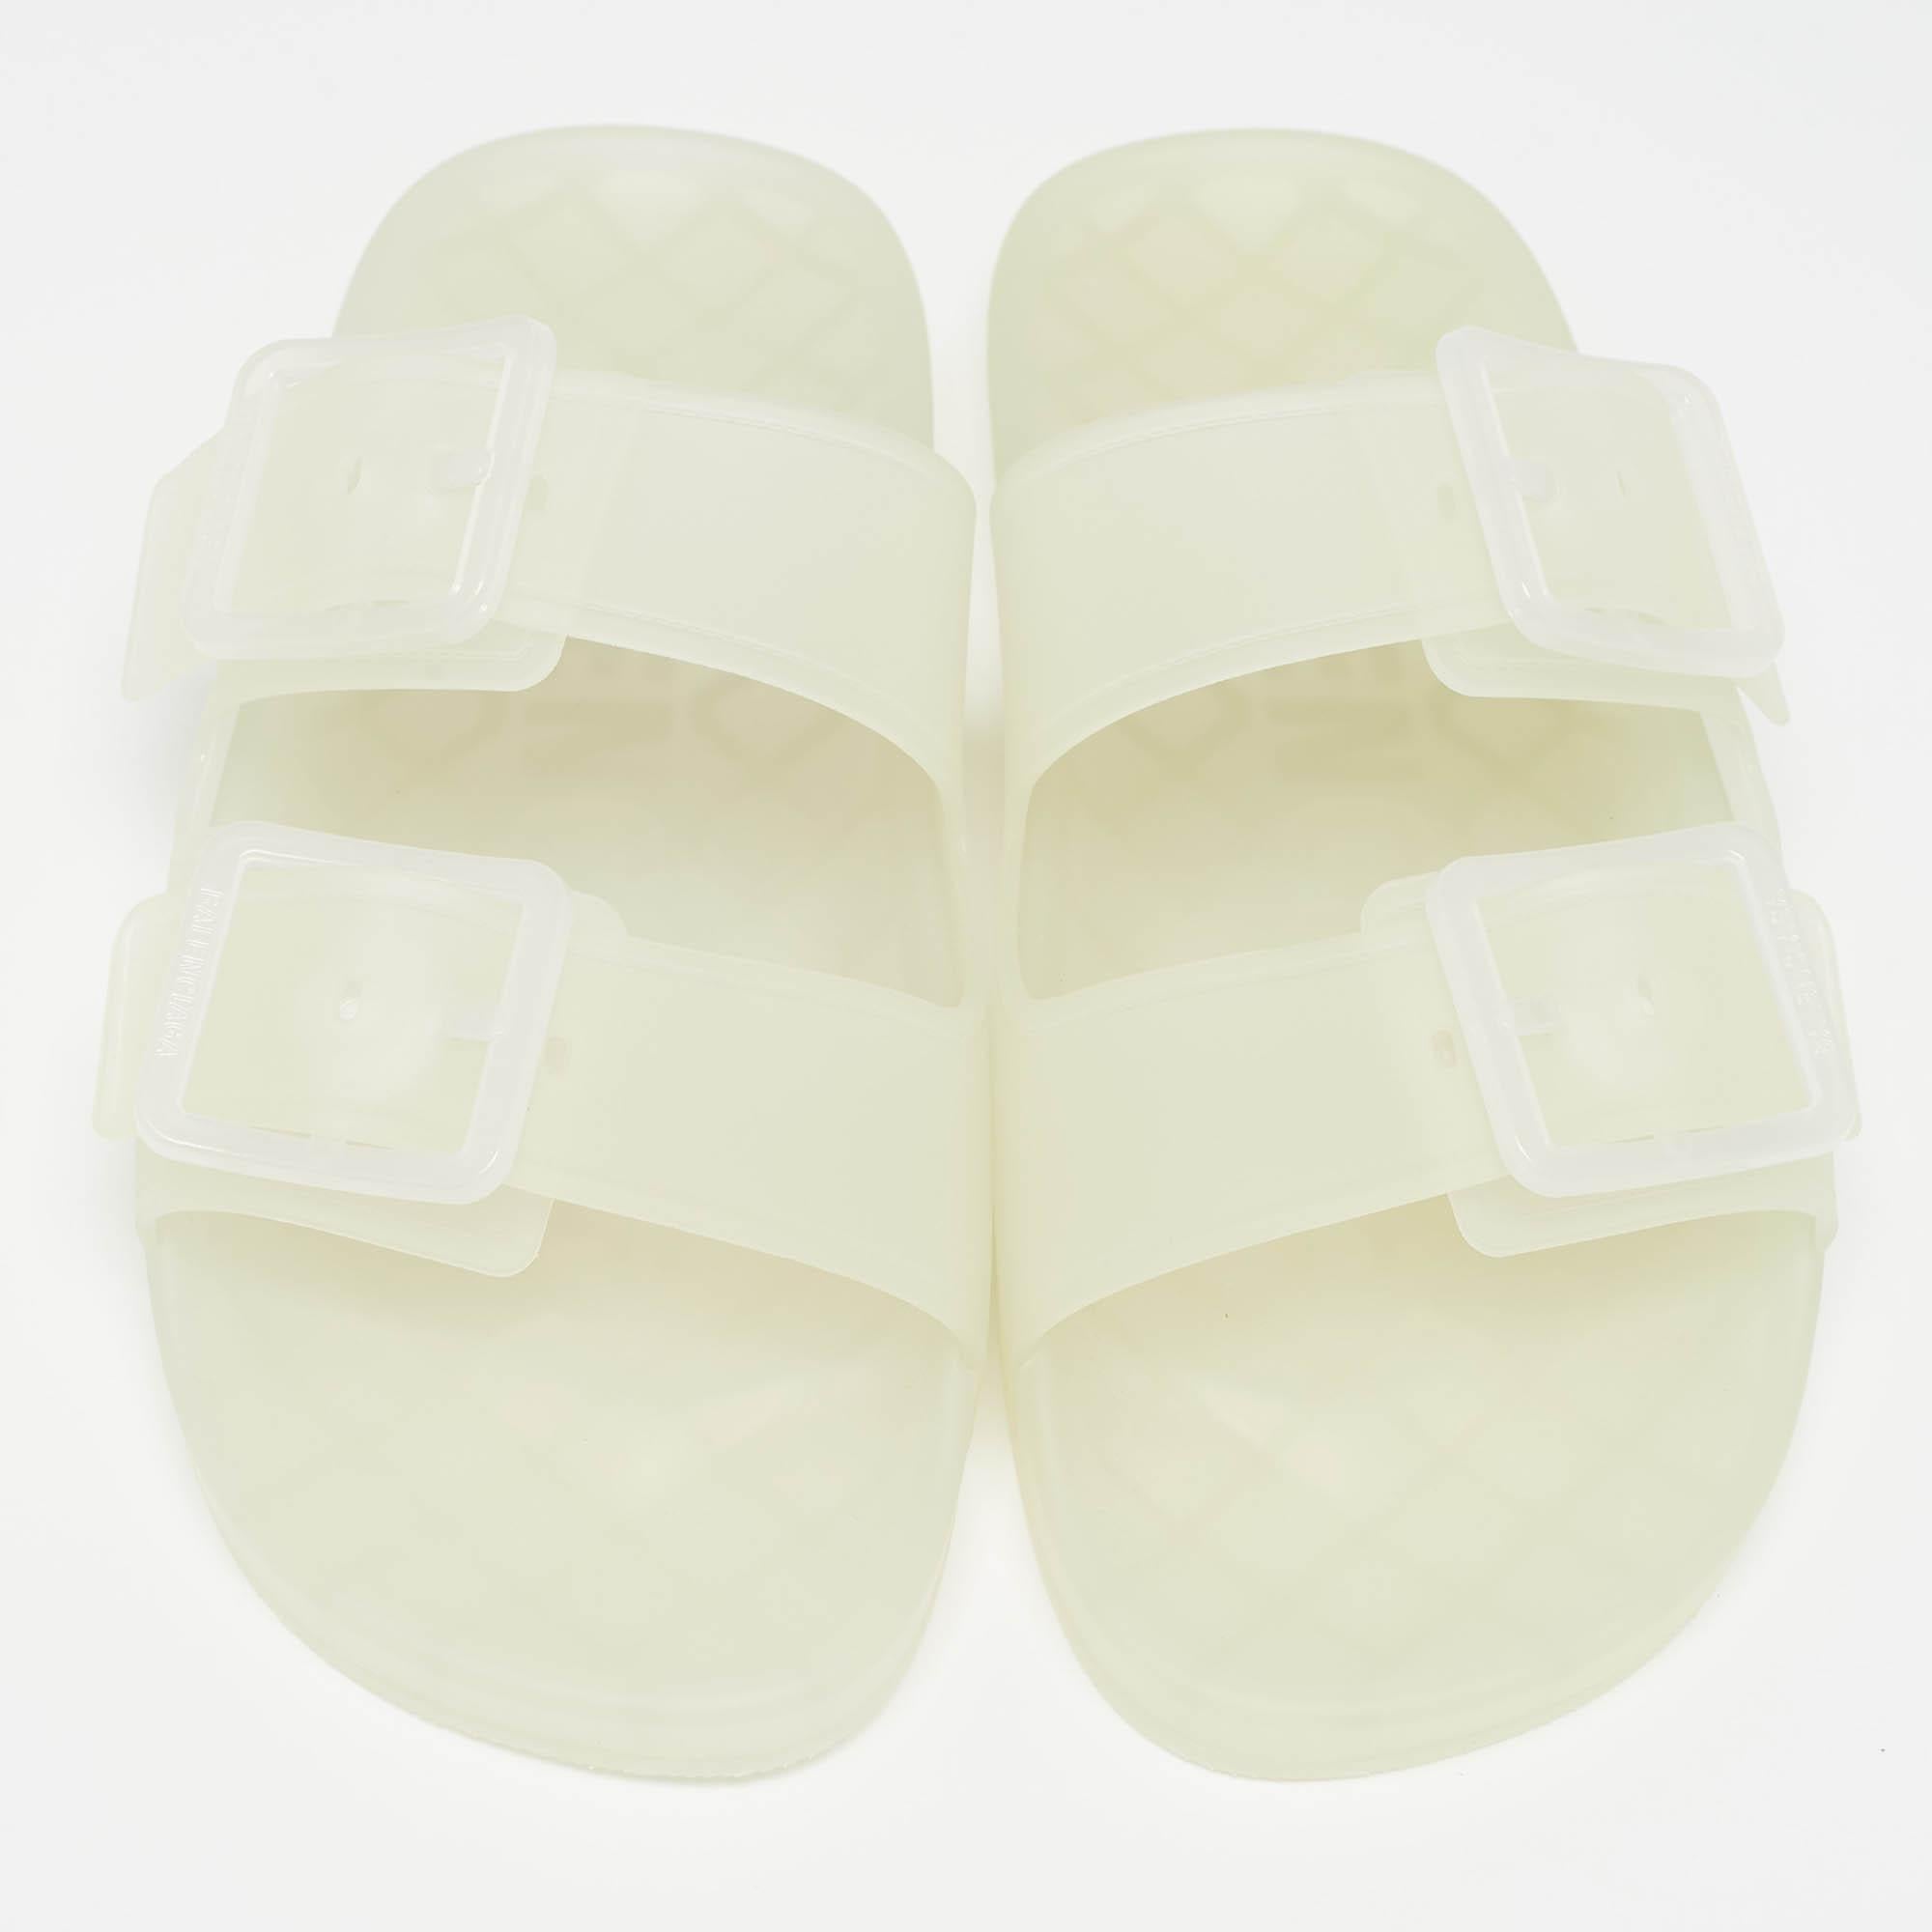 Perfect for your vacation and beach edits to regular use, Balenciaga's Mallorca slides are versatile and comfortable. They have a transparent design with dual buckles on the uppers.

Includes: Original Dustbag, Original Box

